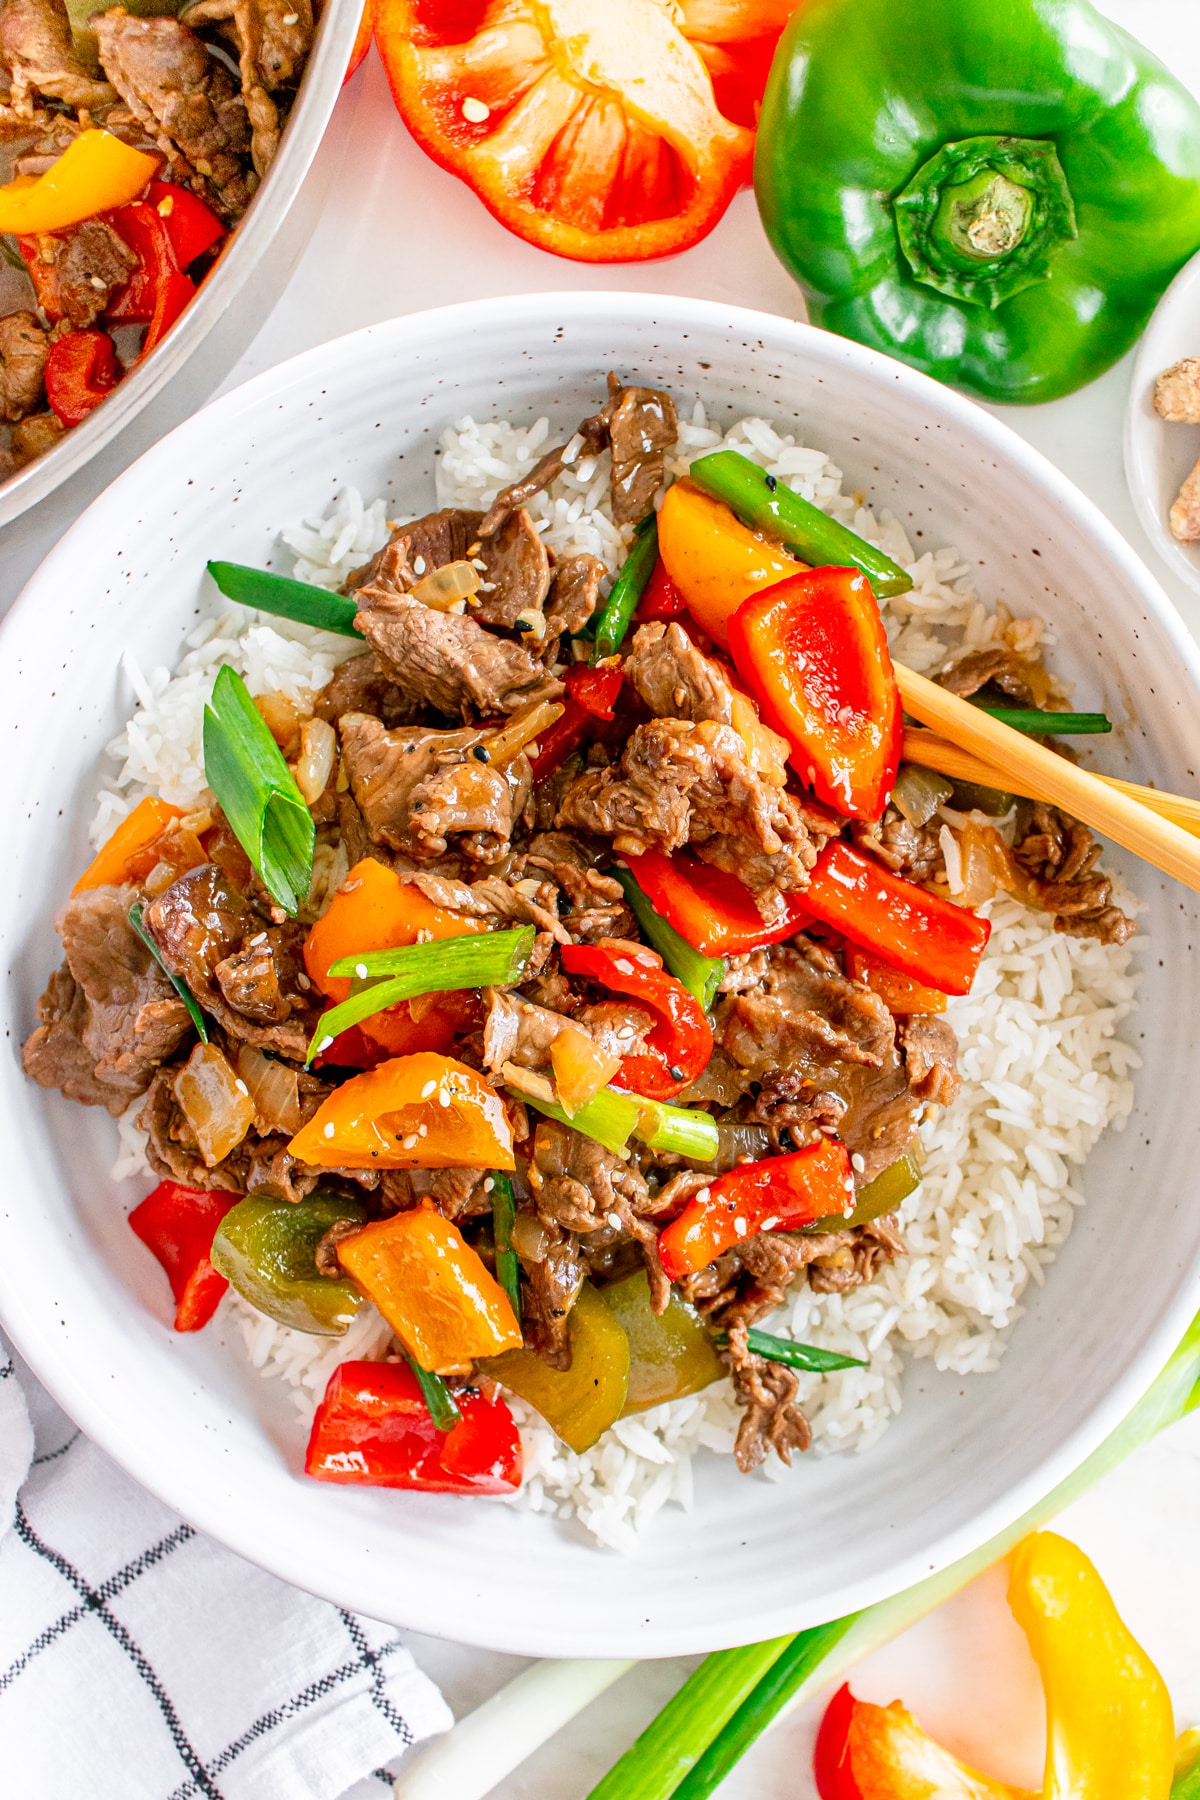 Beef stir-fry with peppers and onions served over white rice.